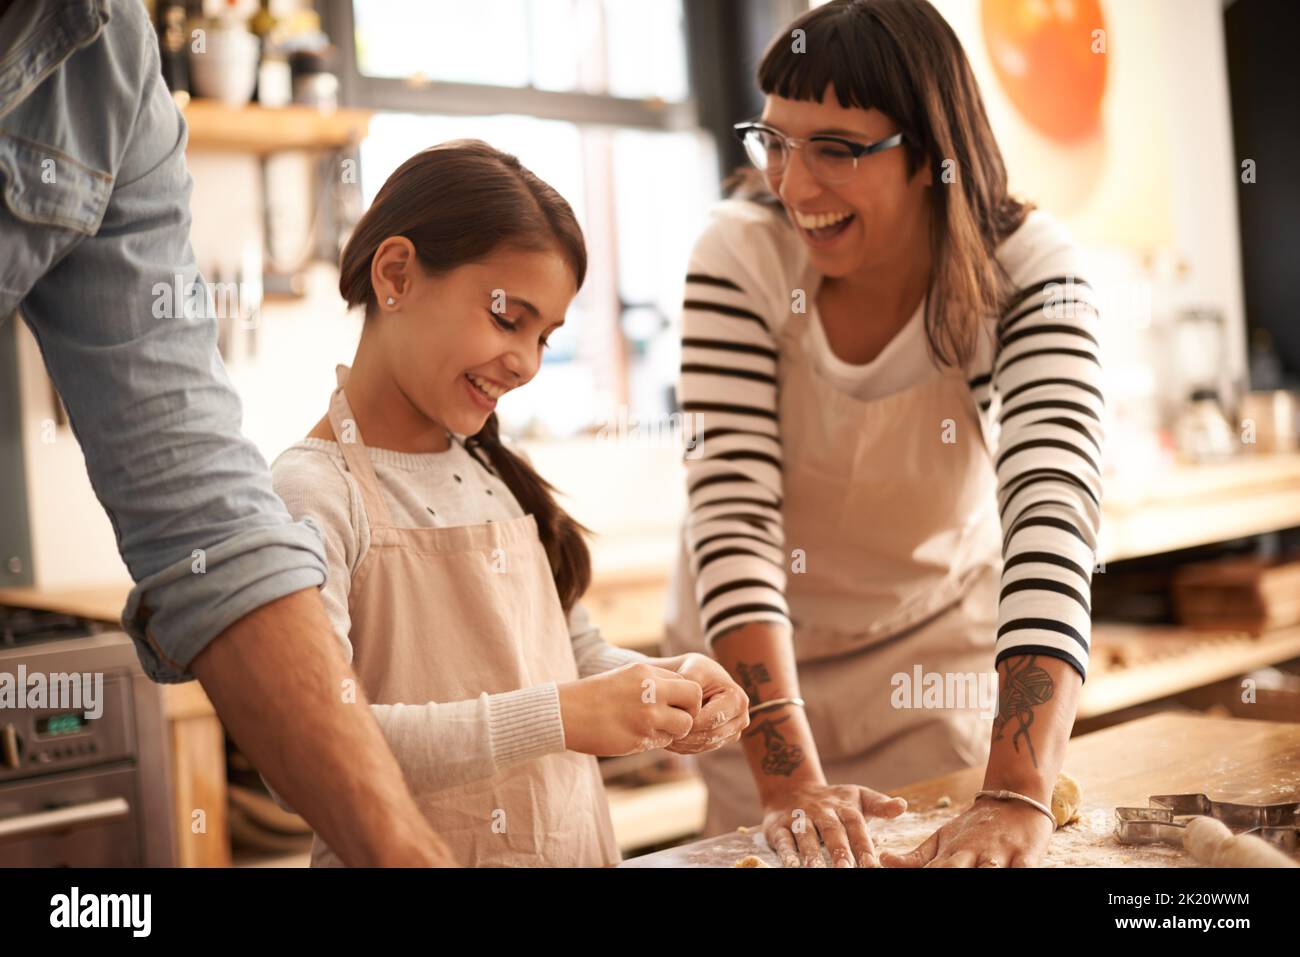 Shes a keen little baker. a family having fun baking in the kitchen. Stock Photo